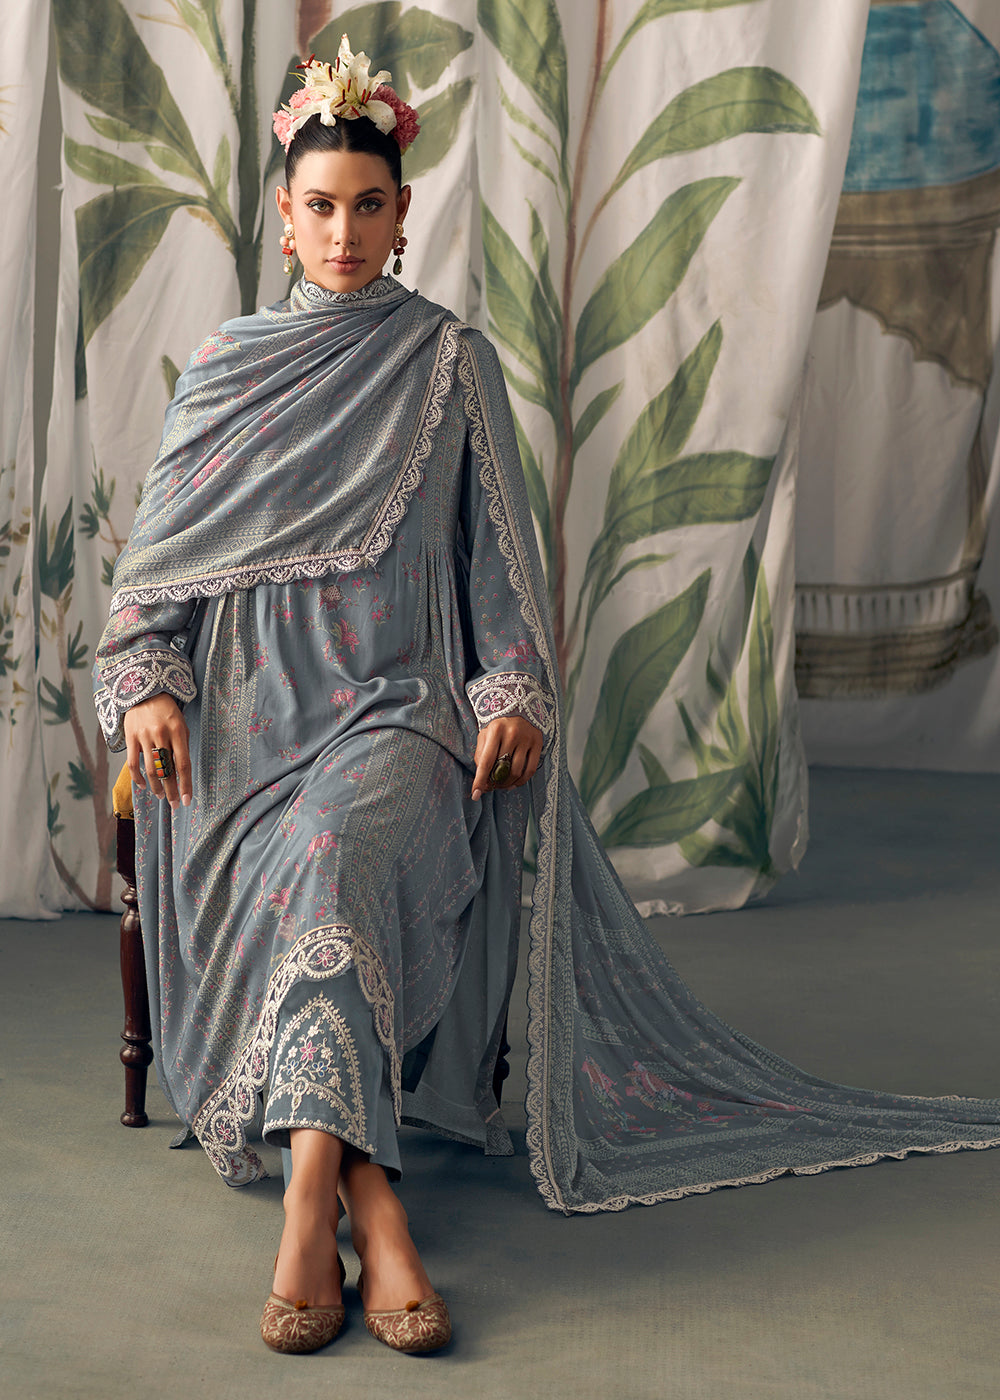 Buy Now Greyish Blue Pure Maslin Cotton Digital Printed Salwar Suit Online in USA, UK, Canada, Germany, Australia & Worldwide at Empress Clothing. 